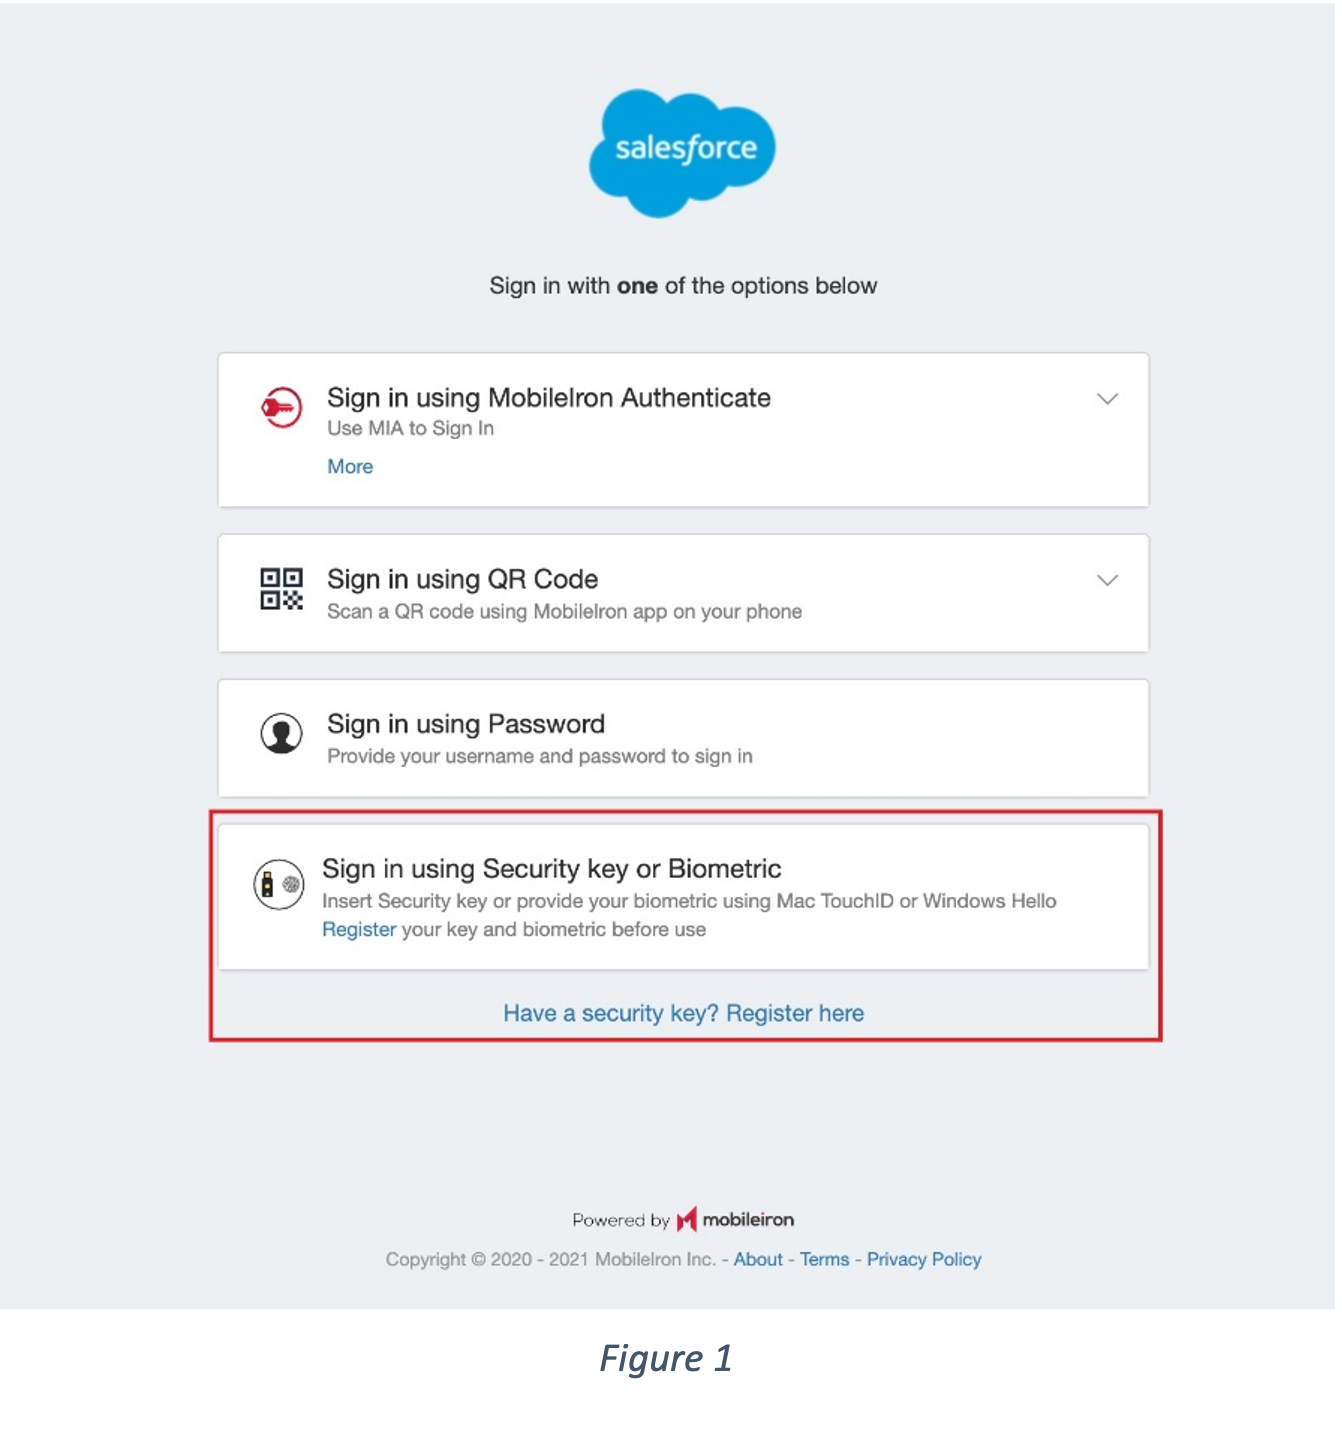 salesforce sign in using security key or biometric